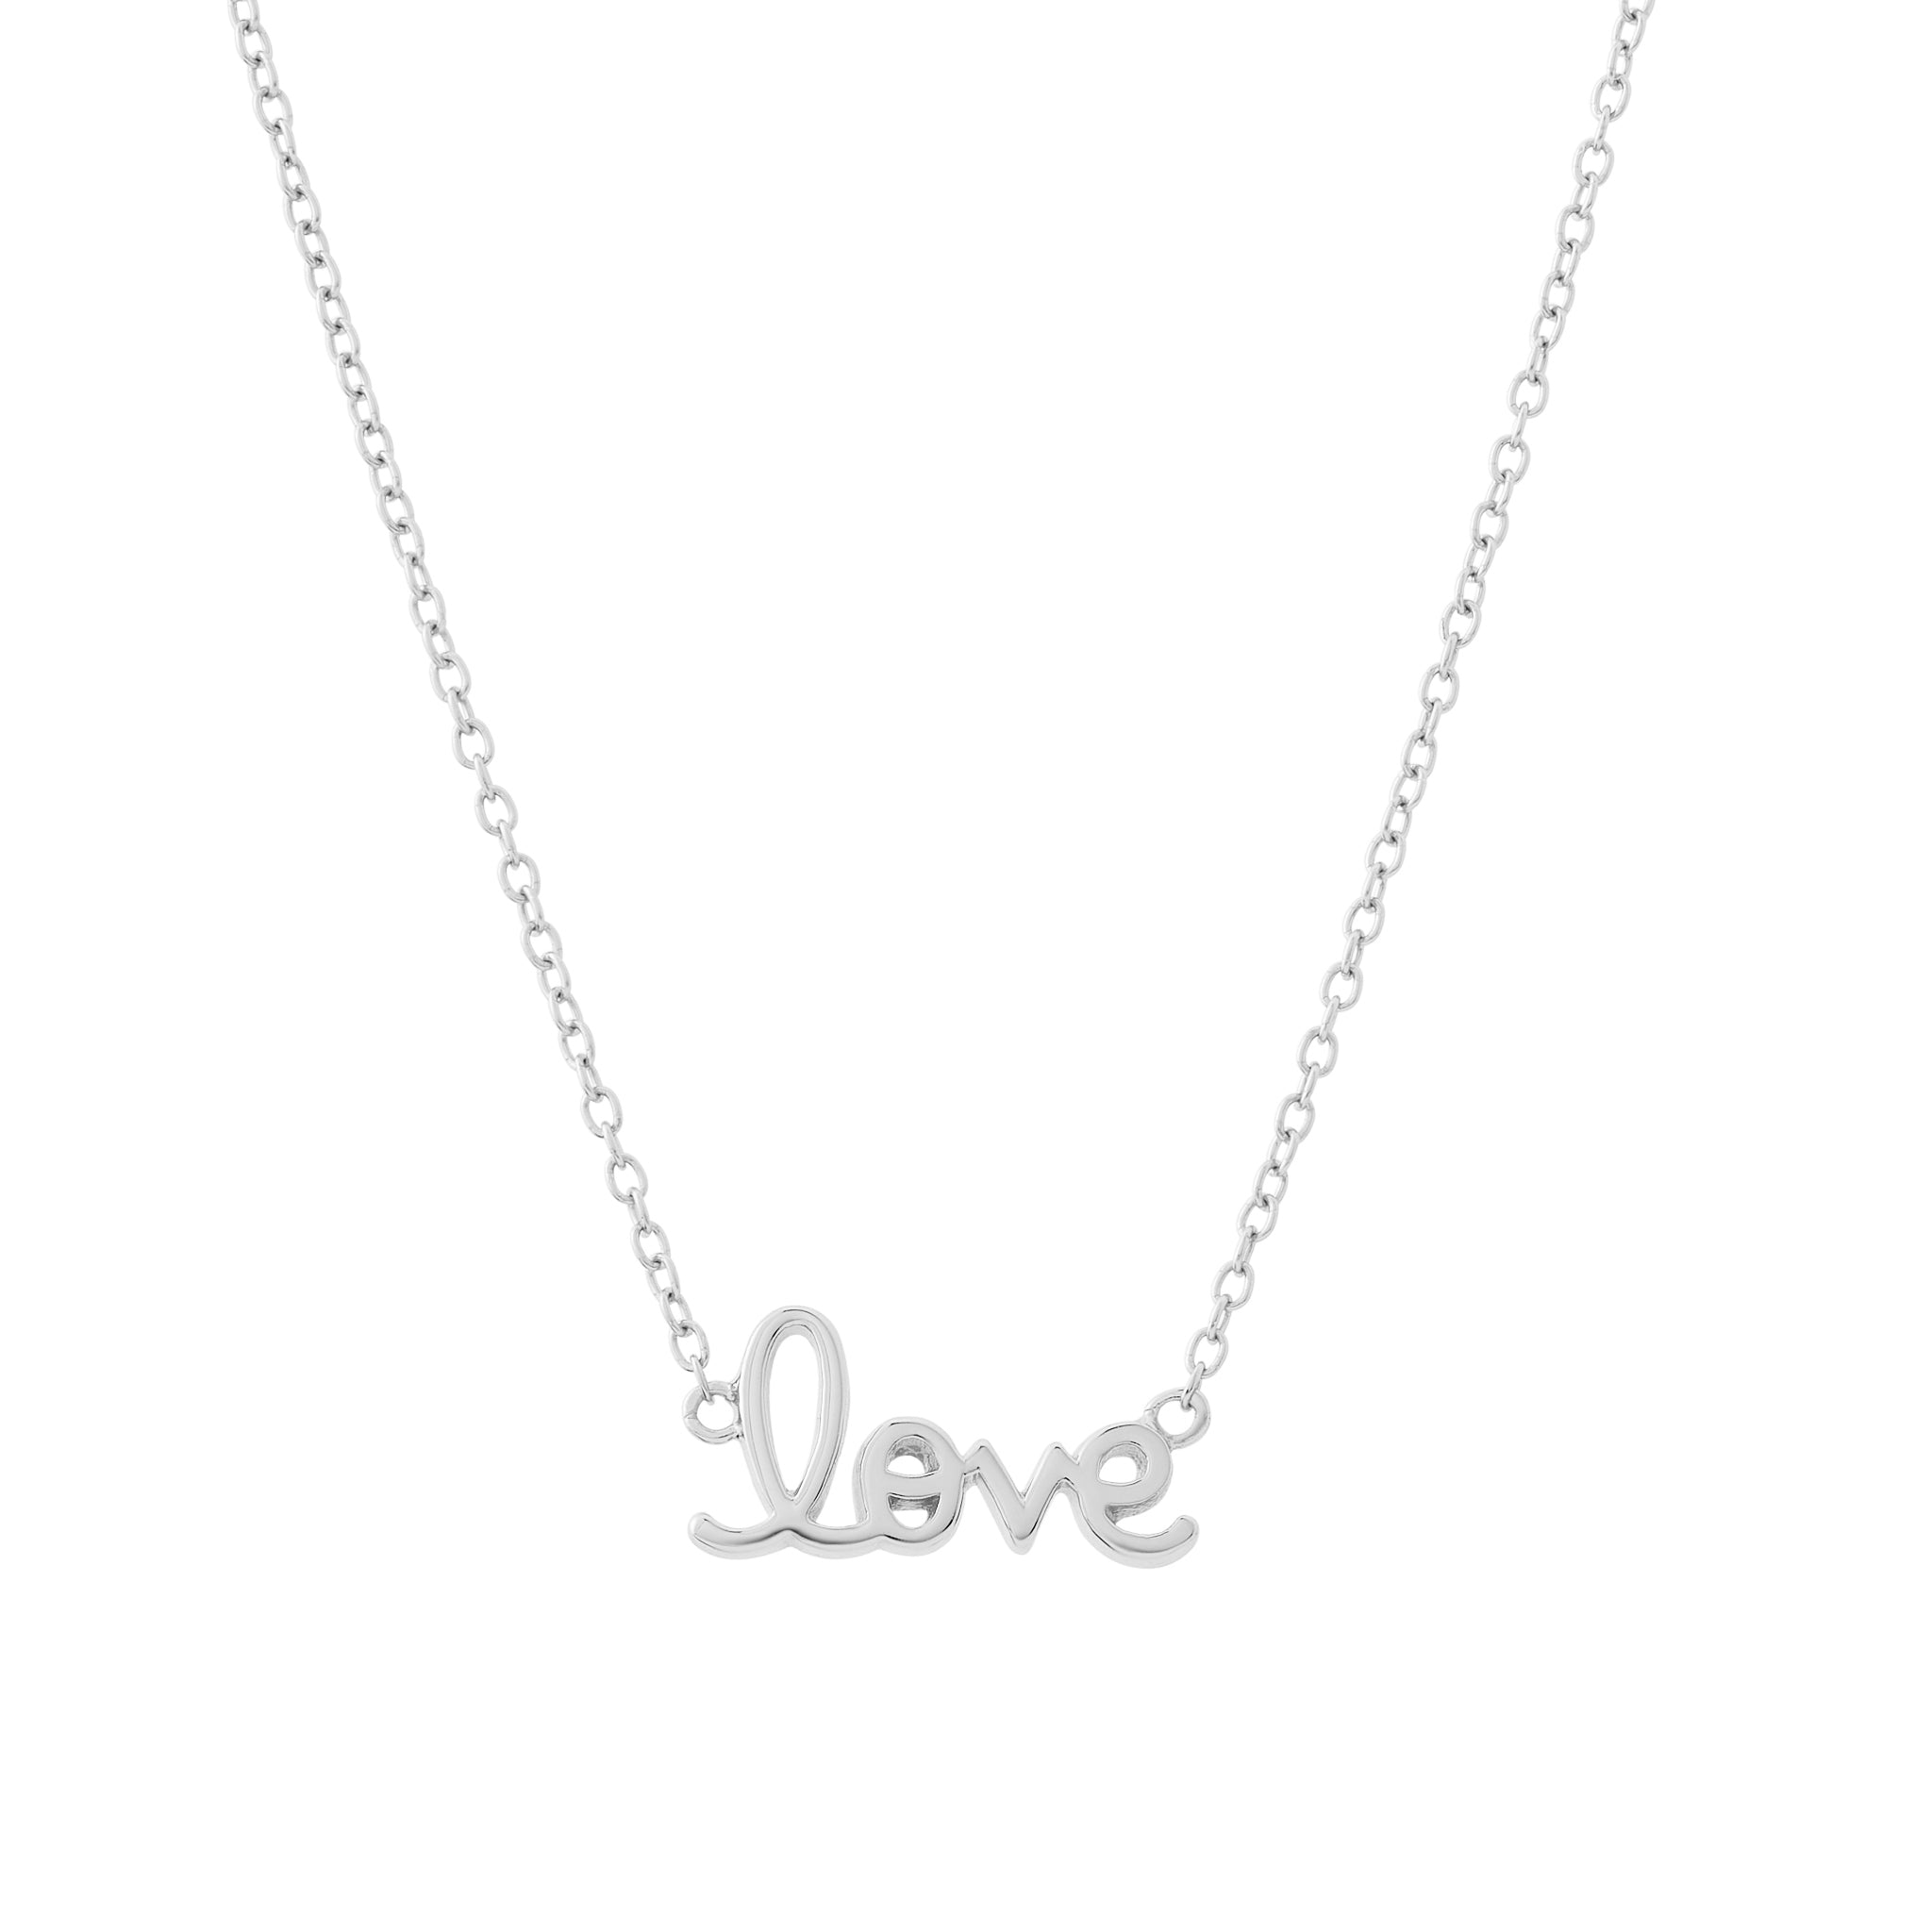 Love Necklace - Silver